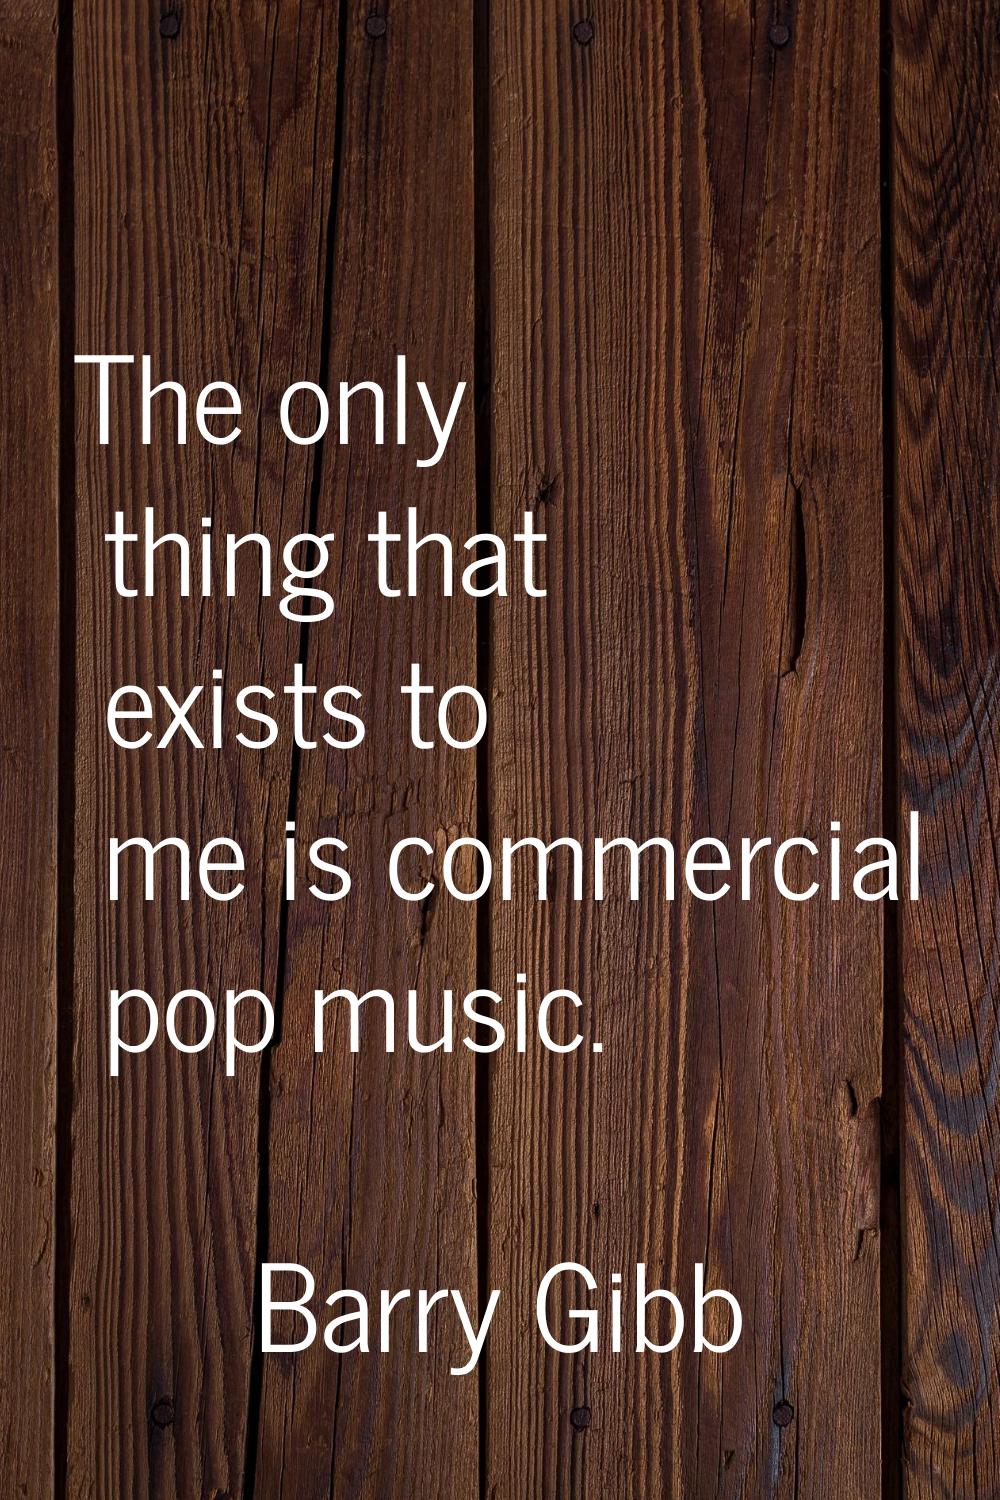 The only thing that exists to me is commercial pop music.